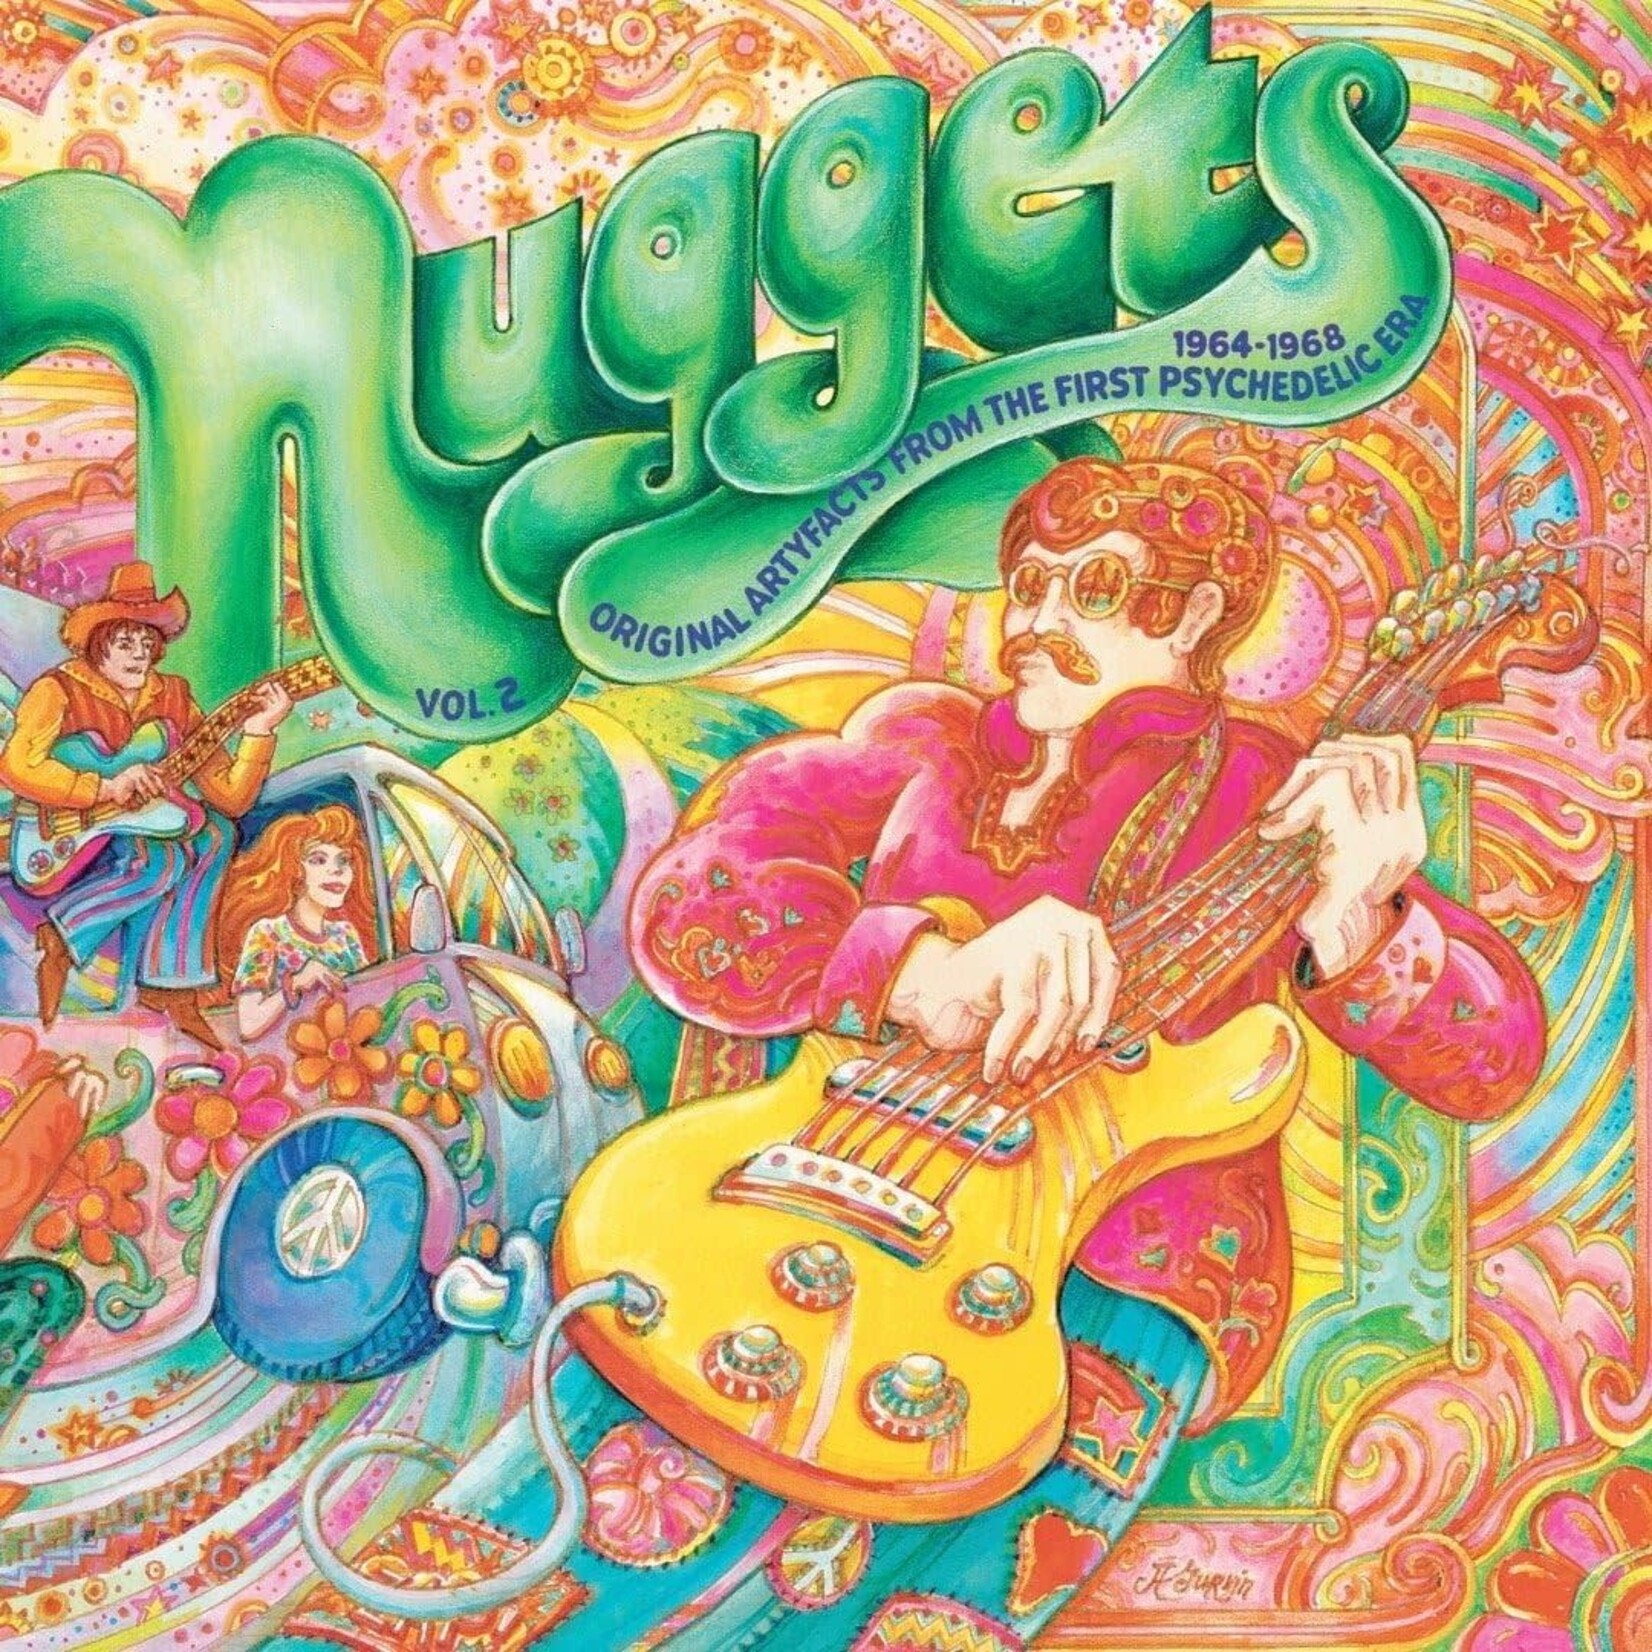 Vinyl Nuggets Vol. 2: Original Artyfacts From the First Psychedelic Era (2 LP Psychedelic Psplatter)